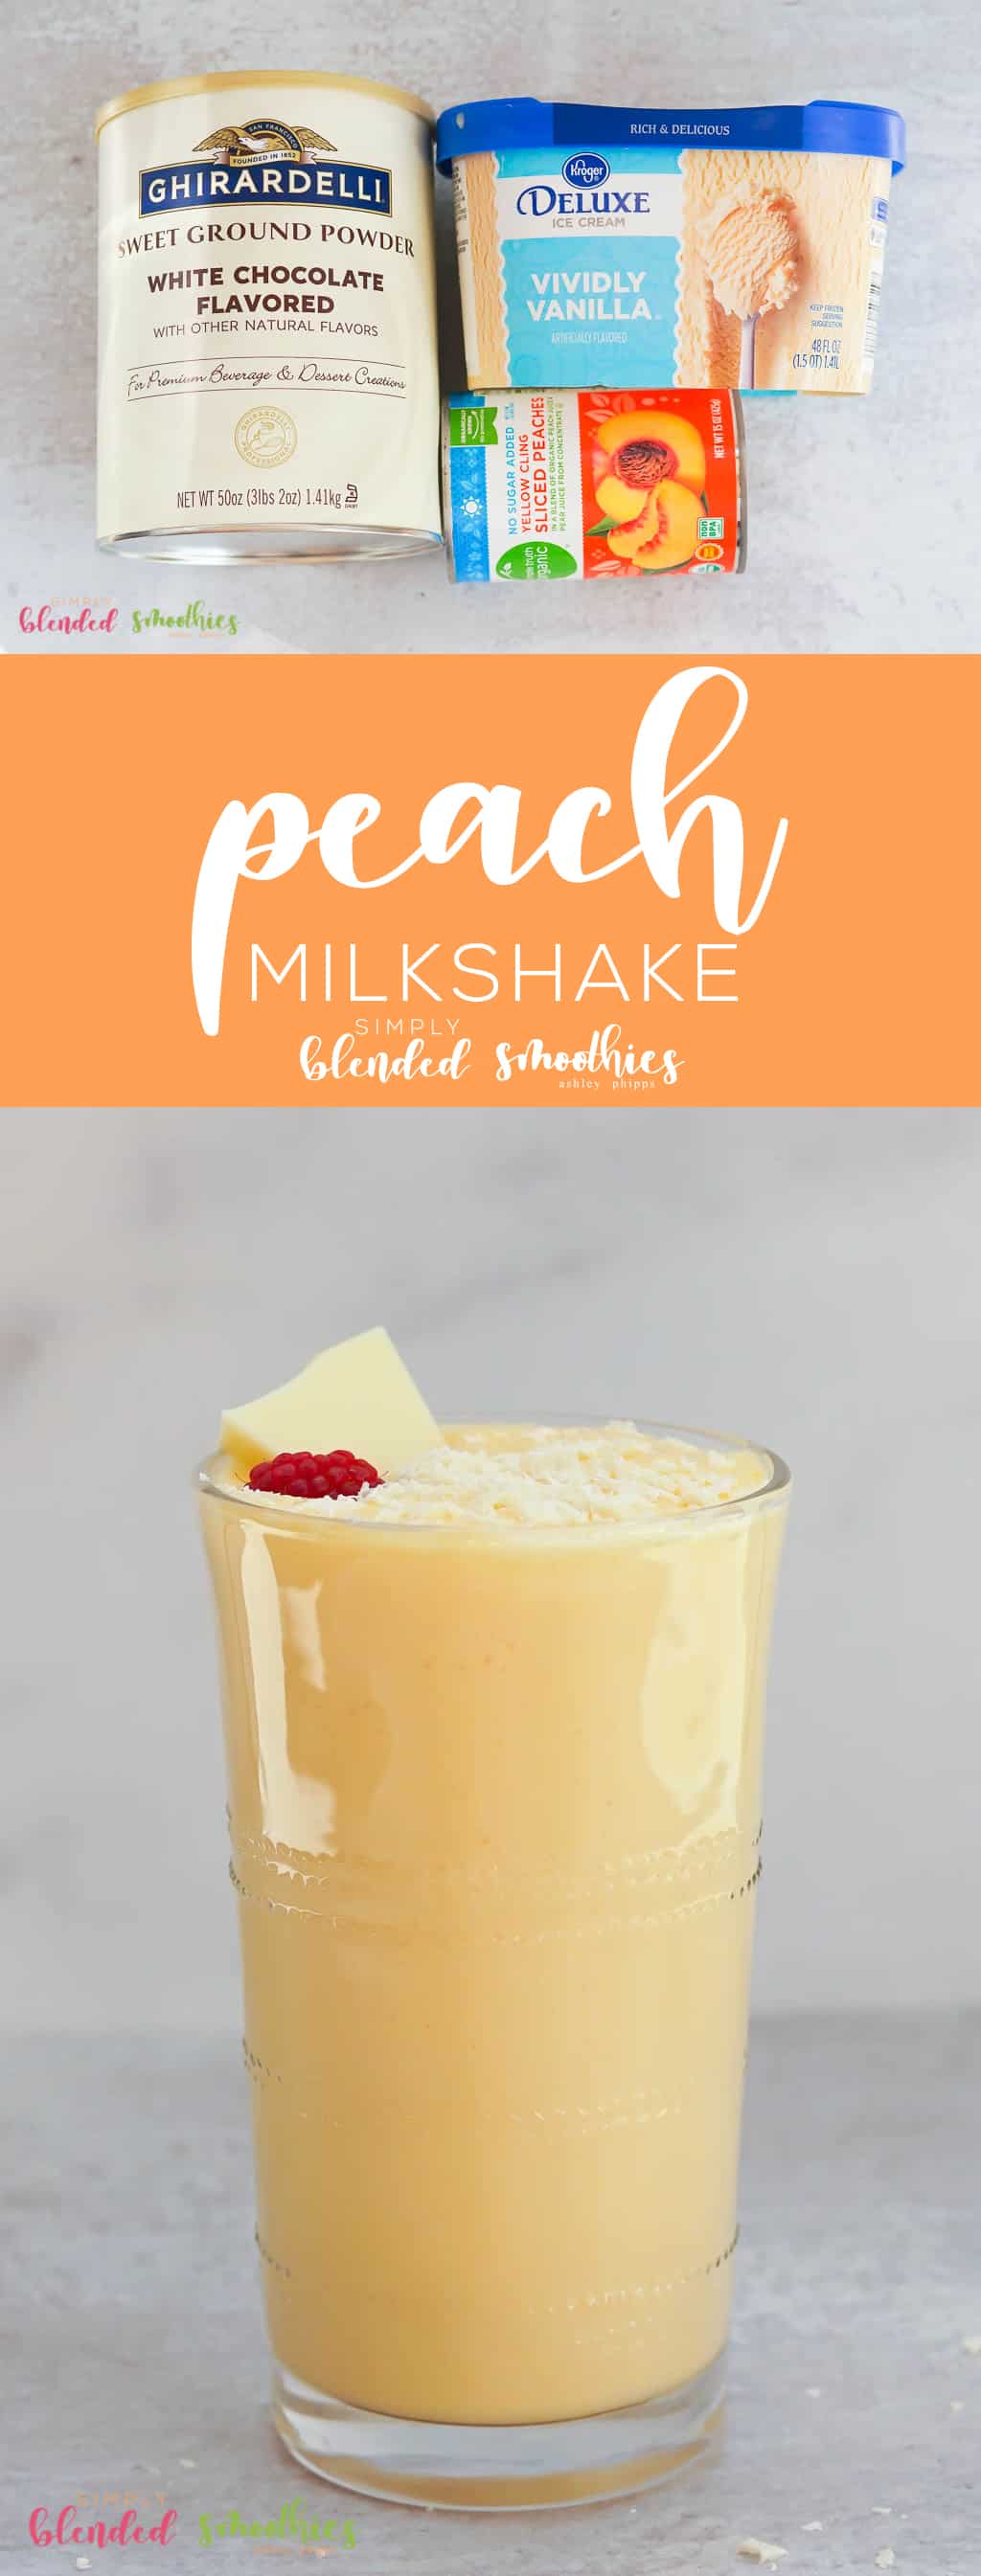 This Peach Milkshake Is A Deliciously Sweet Treat That Rivals A Chick-Fil-A Peach Milkshake Because The Secret Ingredient Makes This Irresistibly Delicious